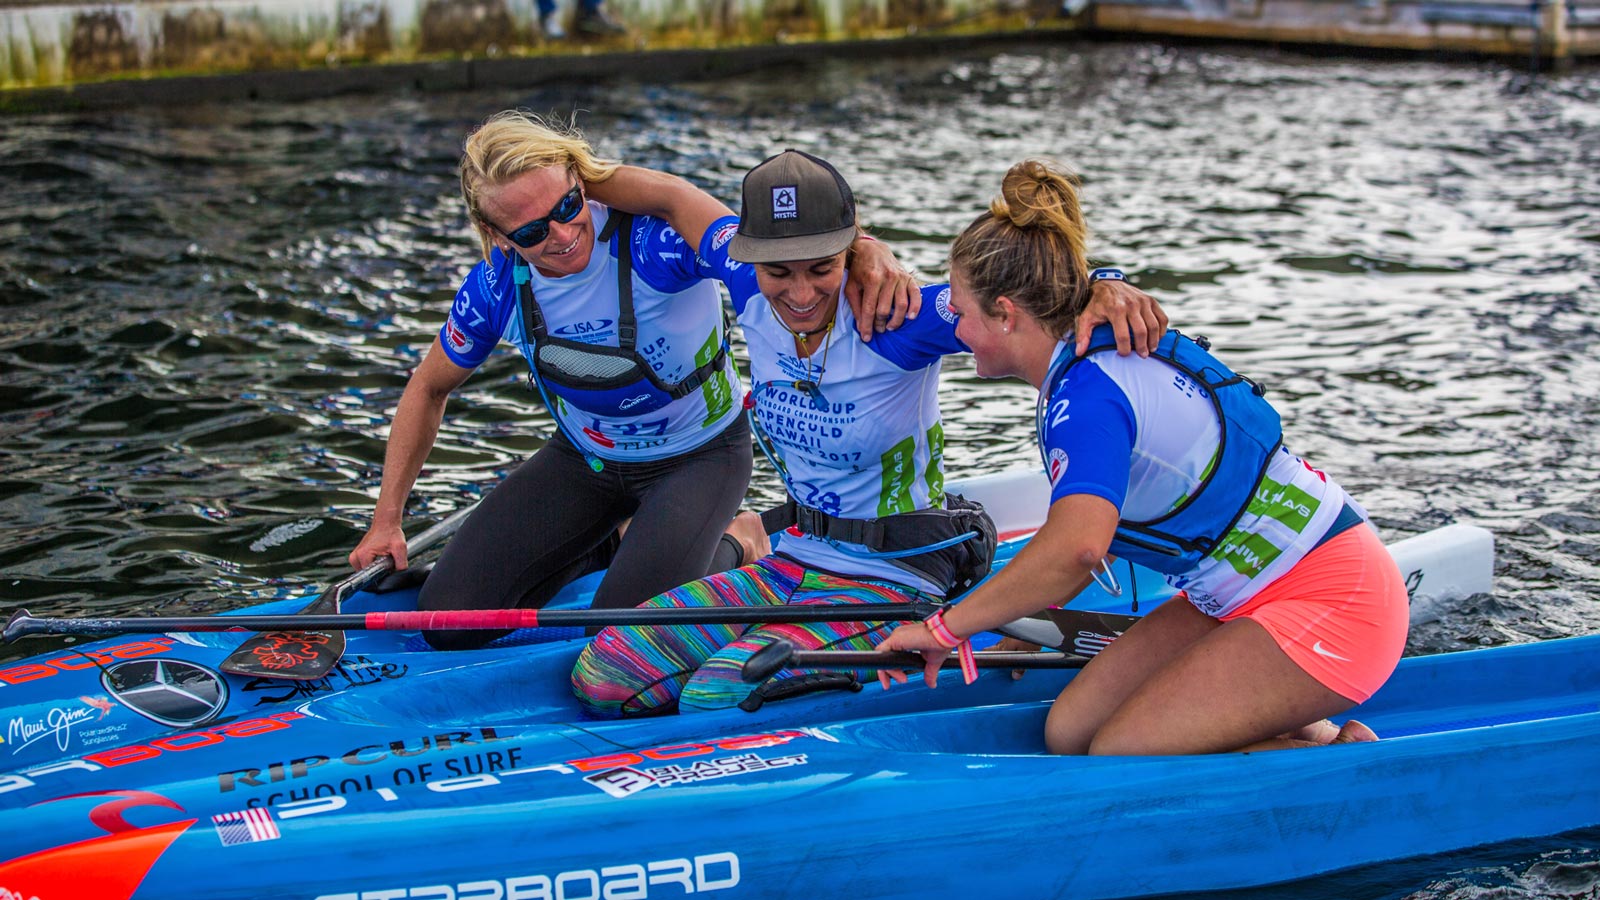 Team Starboard's Sonni Honscheid, Olivia Piana and Fiona Wylde